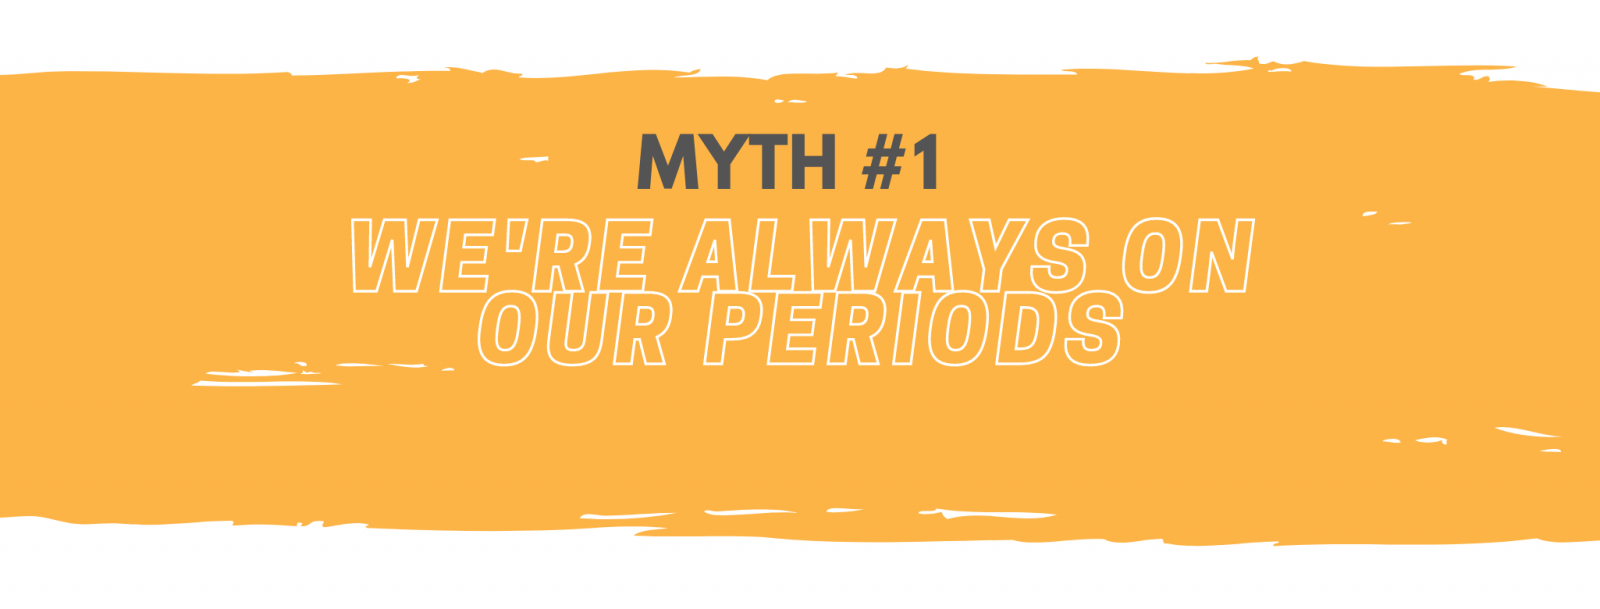 Always on our periods myth